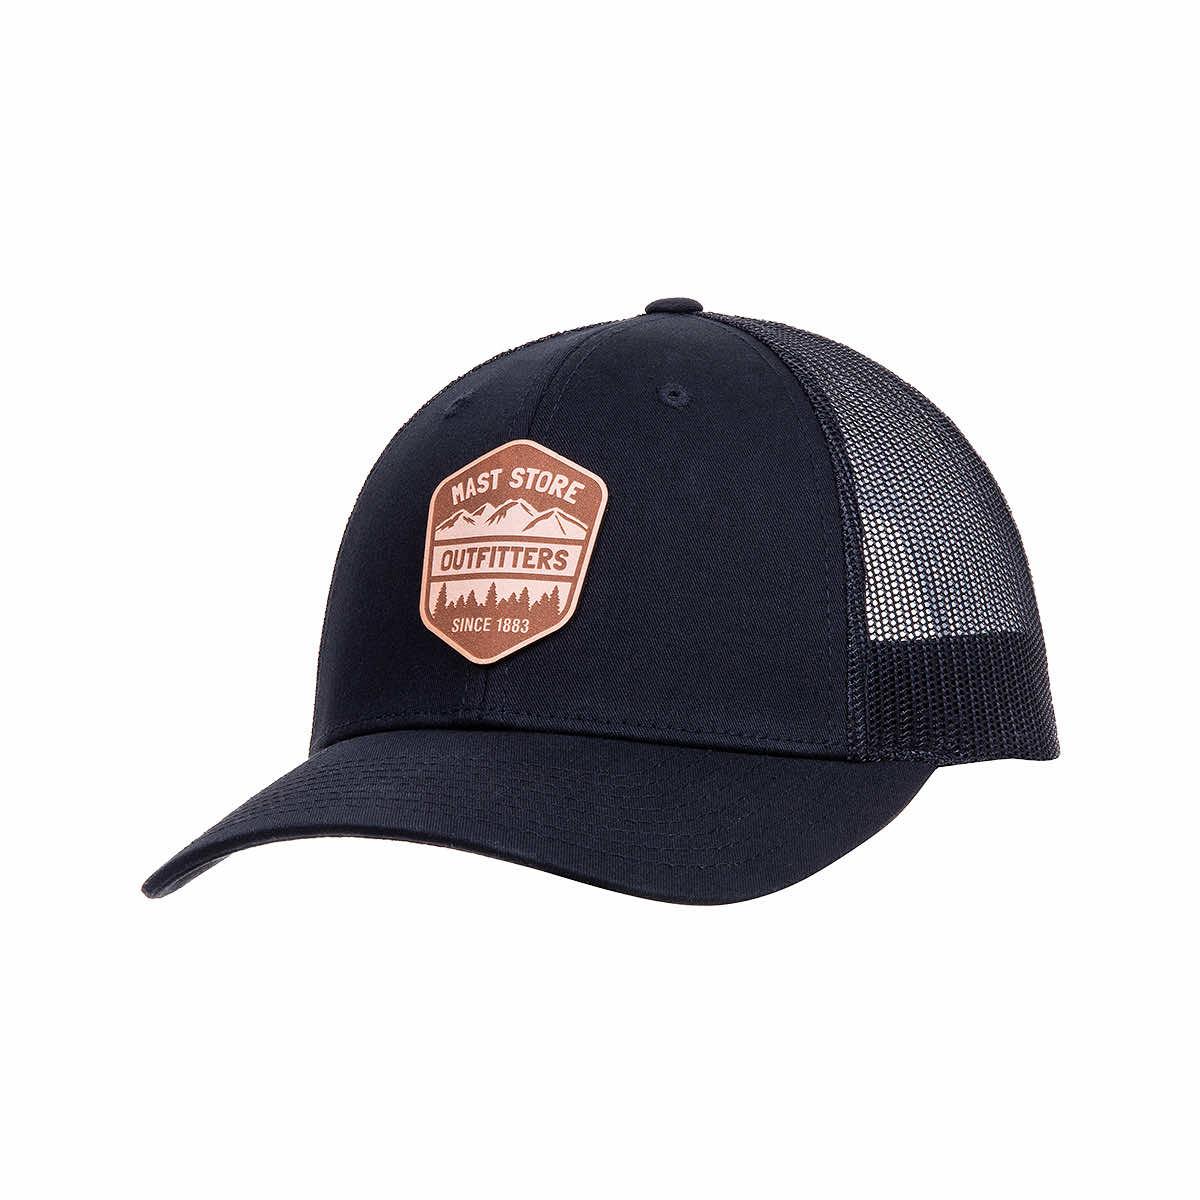 Respect The Locals Leather Hat Patch Brown